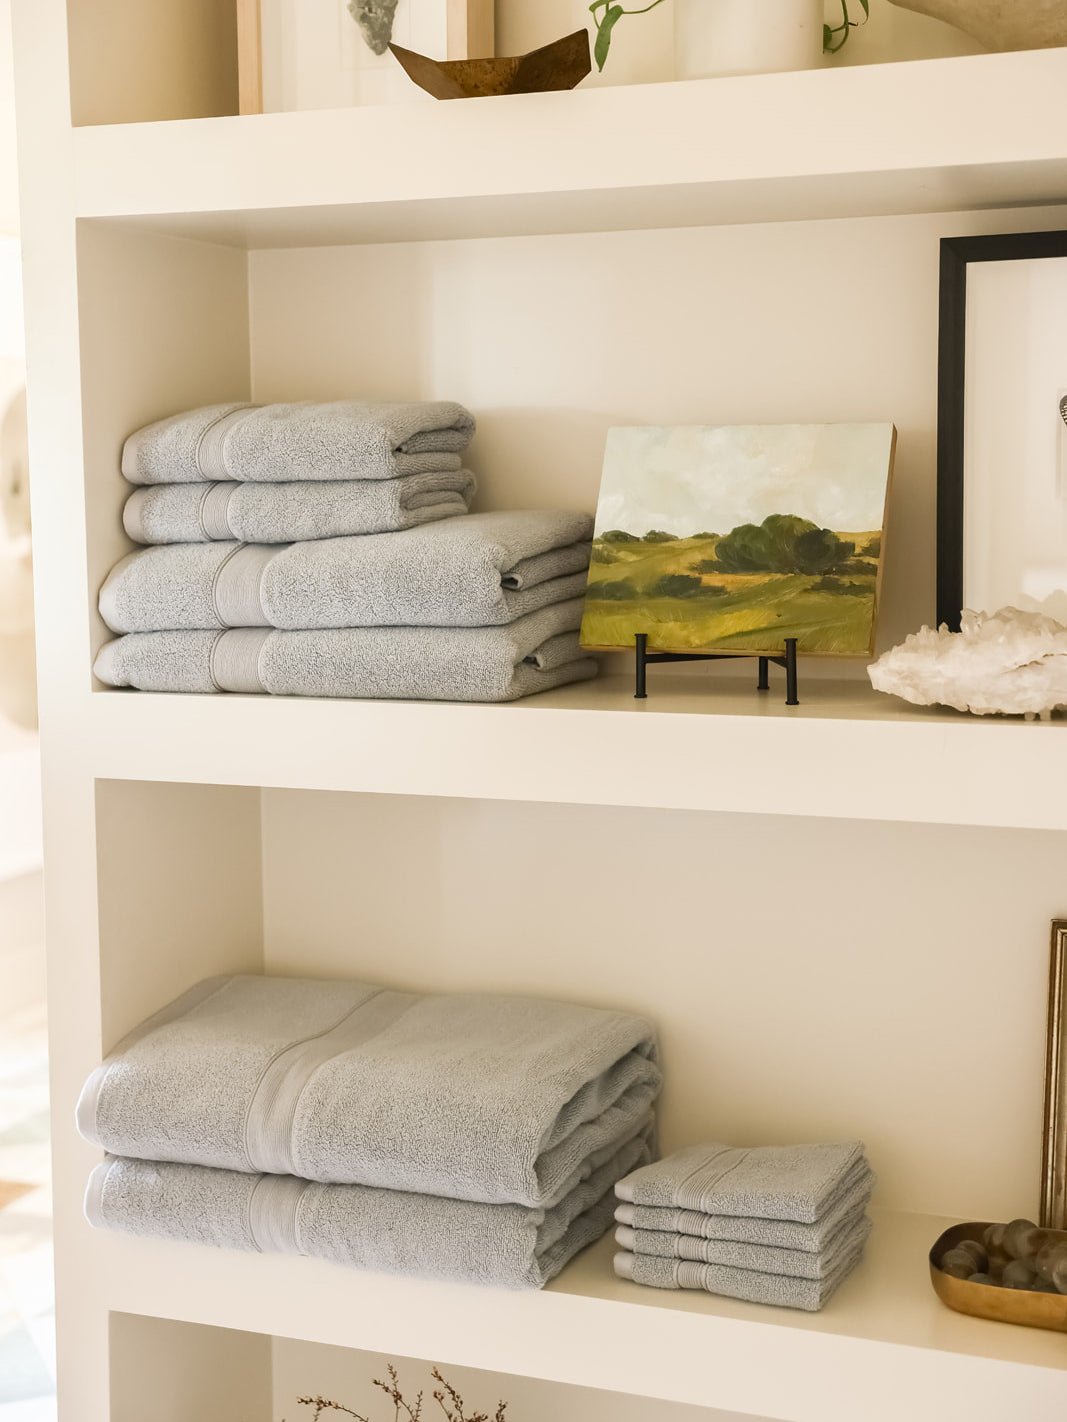 Collection of harbor mist luxe towels on shelves 